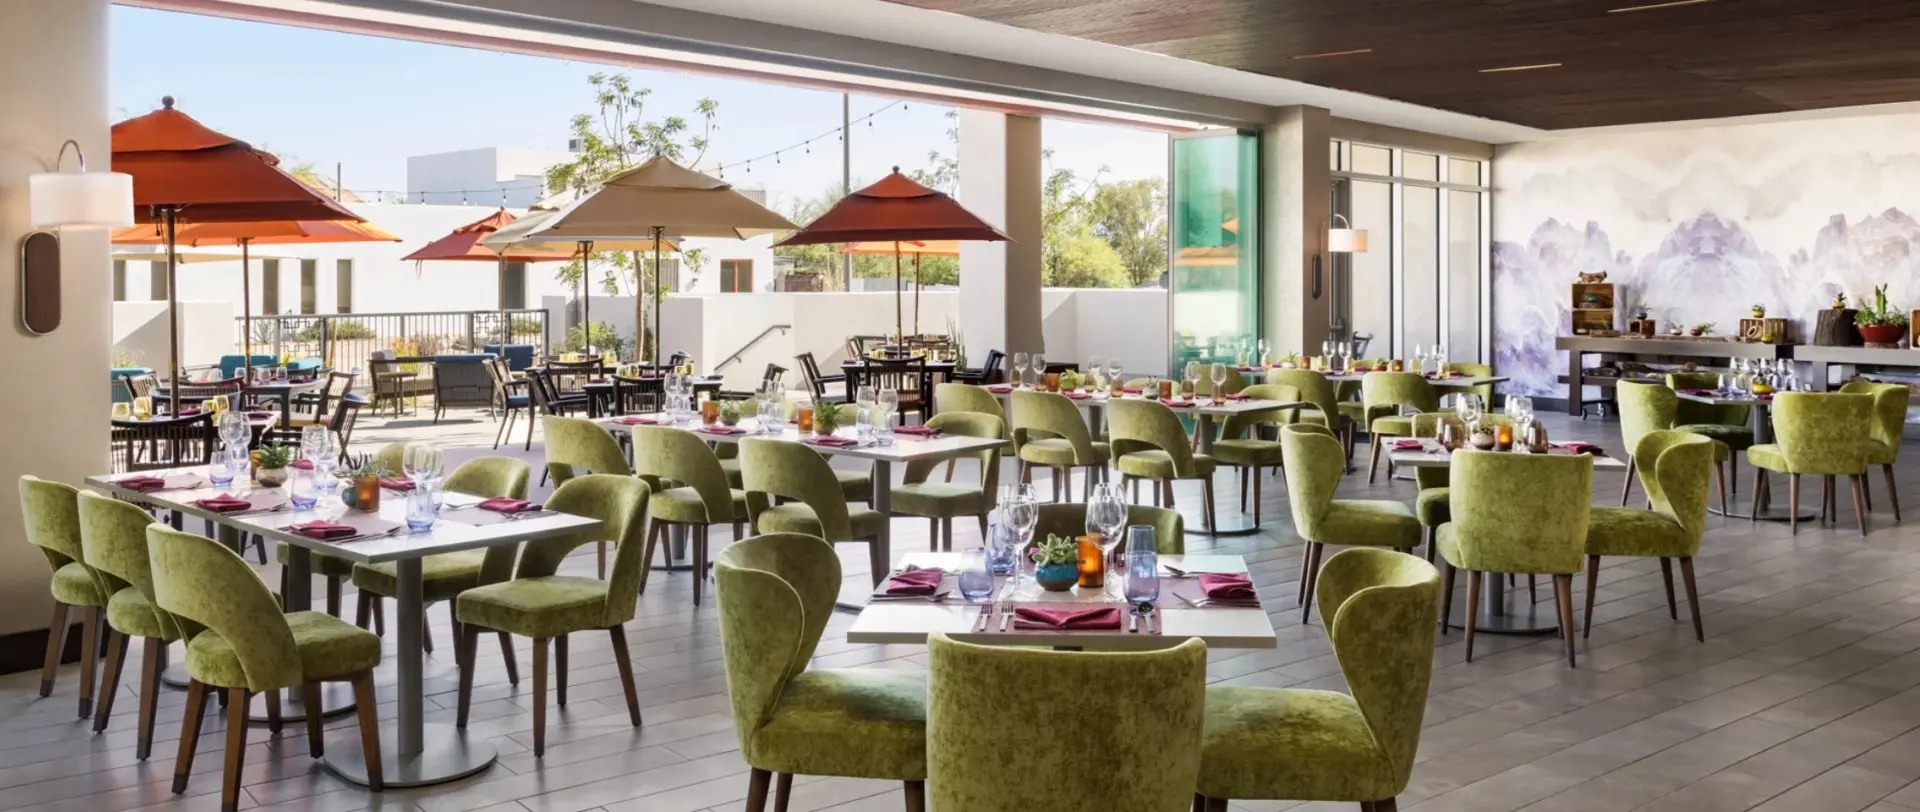 Colorful furniture adorns the dining space of this hotel